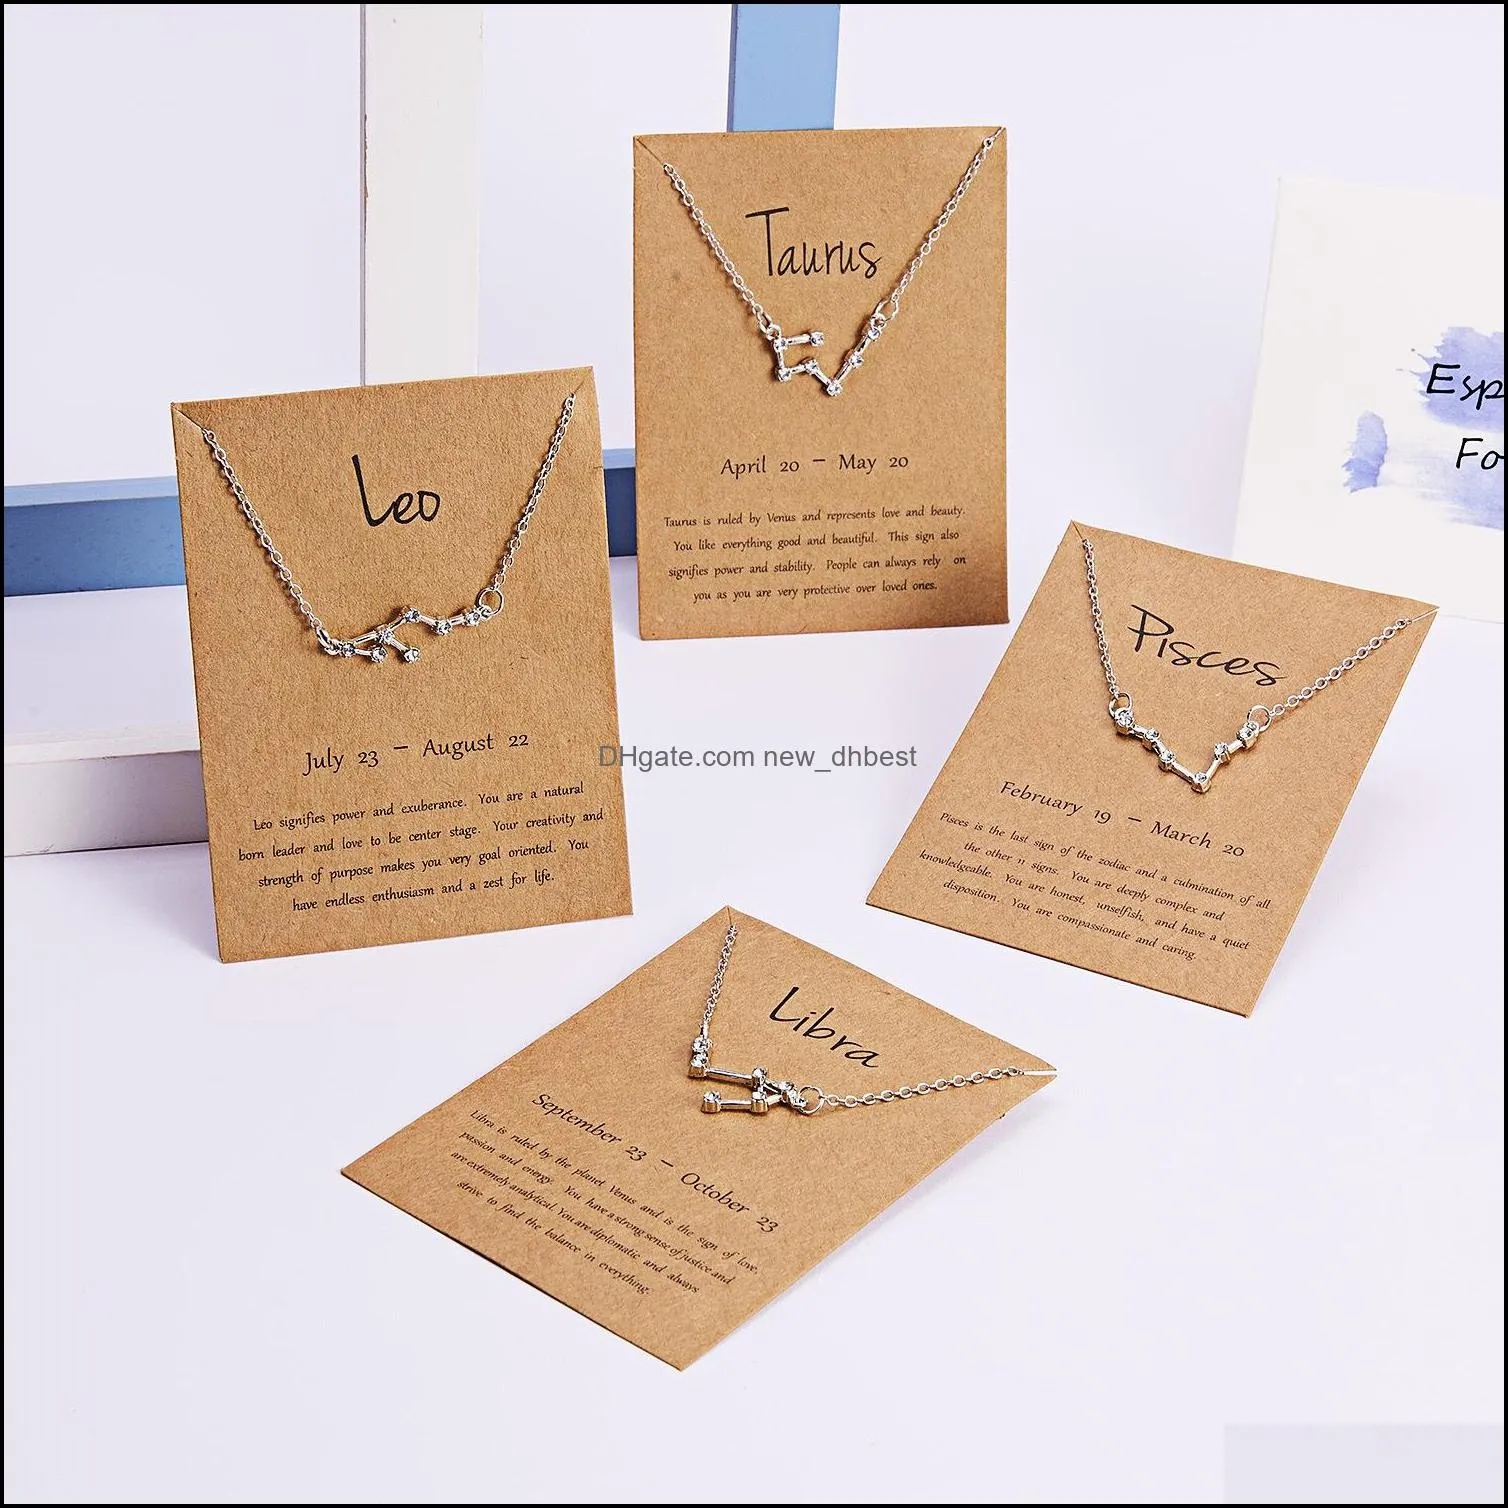 12 zodiac sign card necklaces for women men constellation horoscope shape pendant gold silver chains fashion jewelry gift